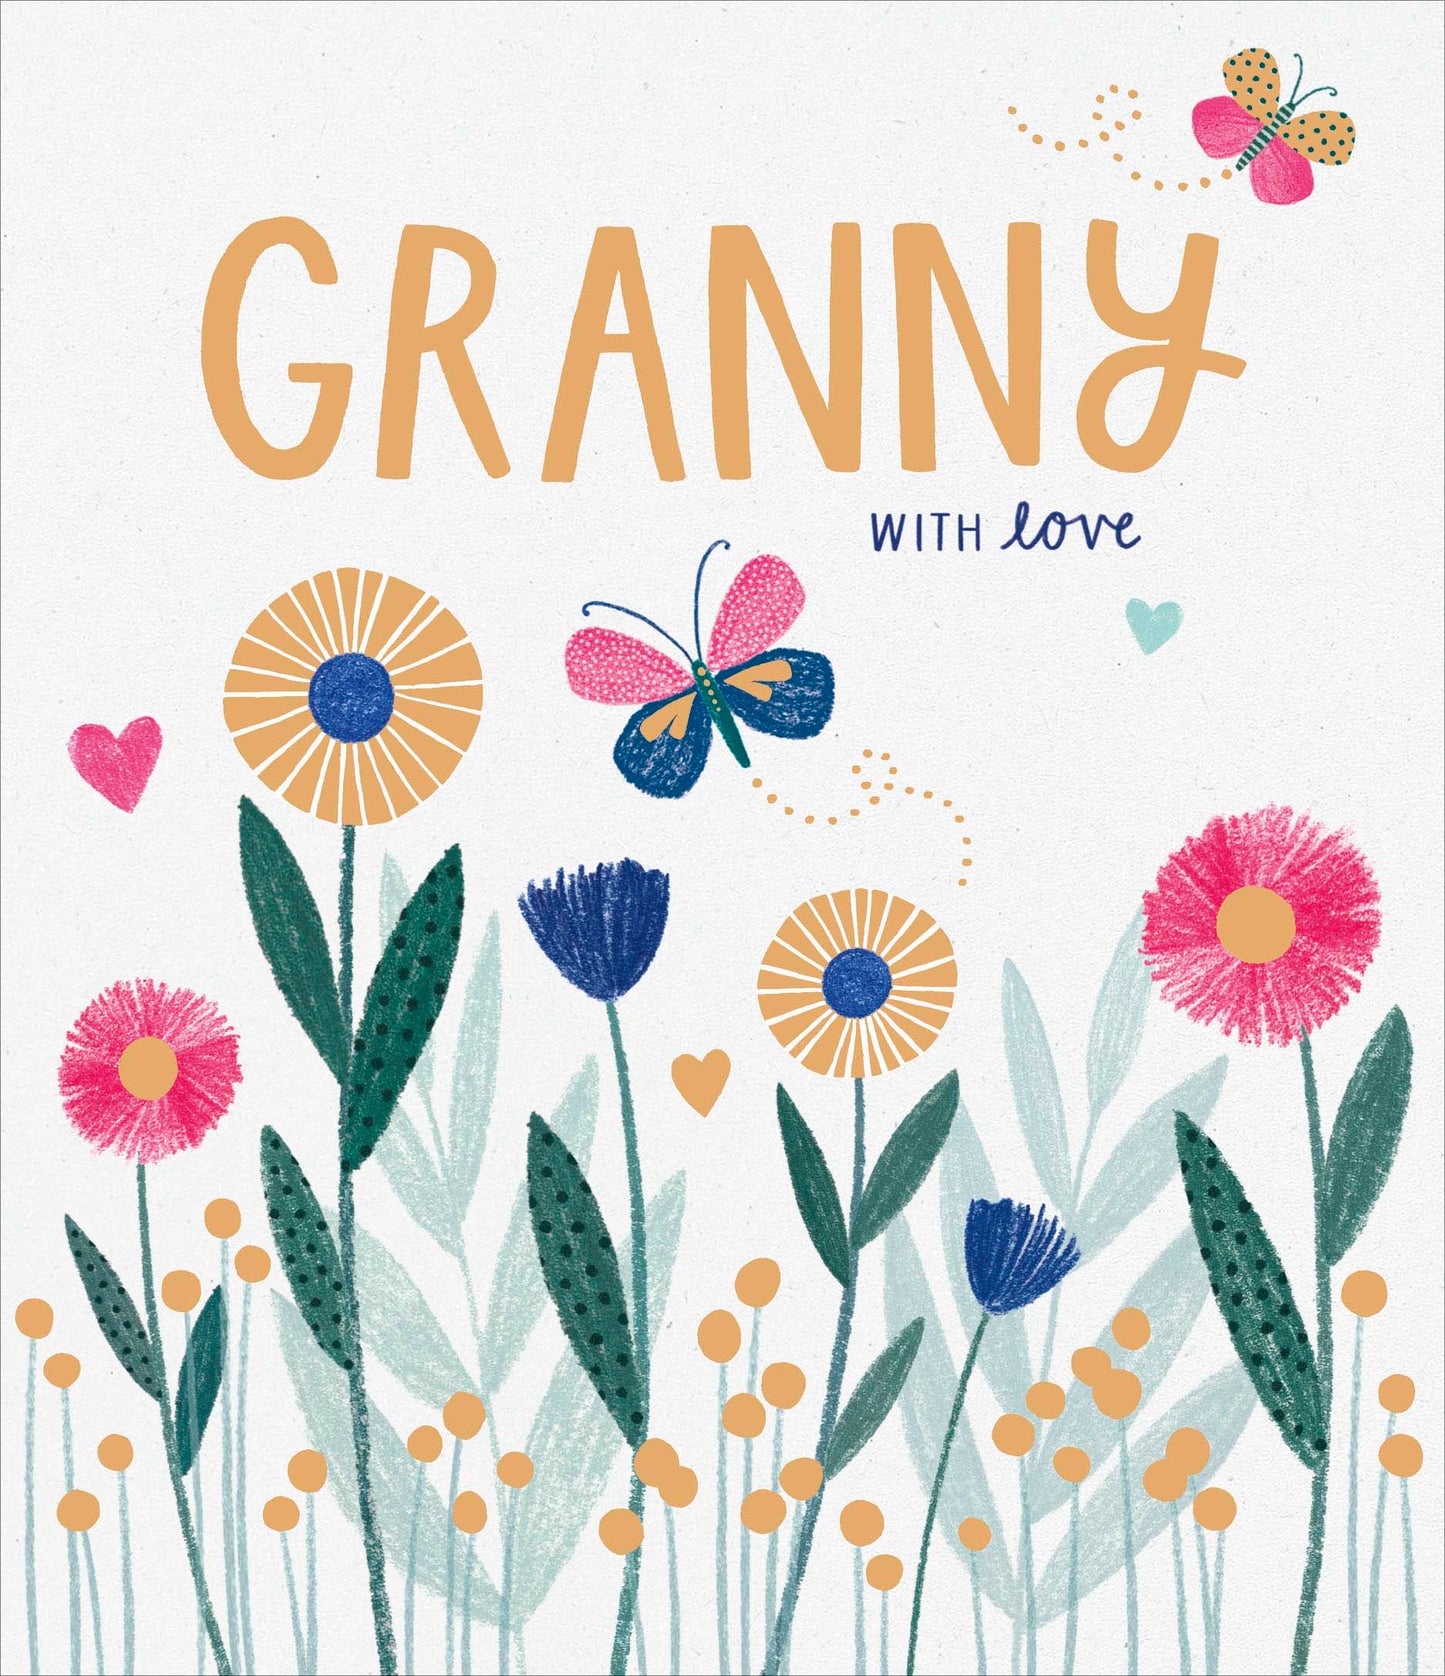 Granny With Love Flowers Birthday Greeting Card